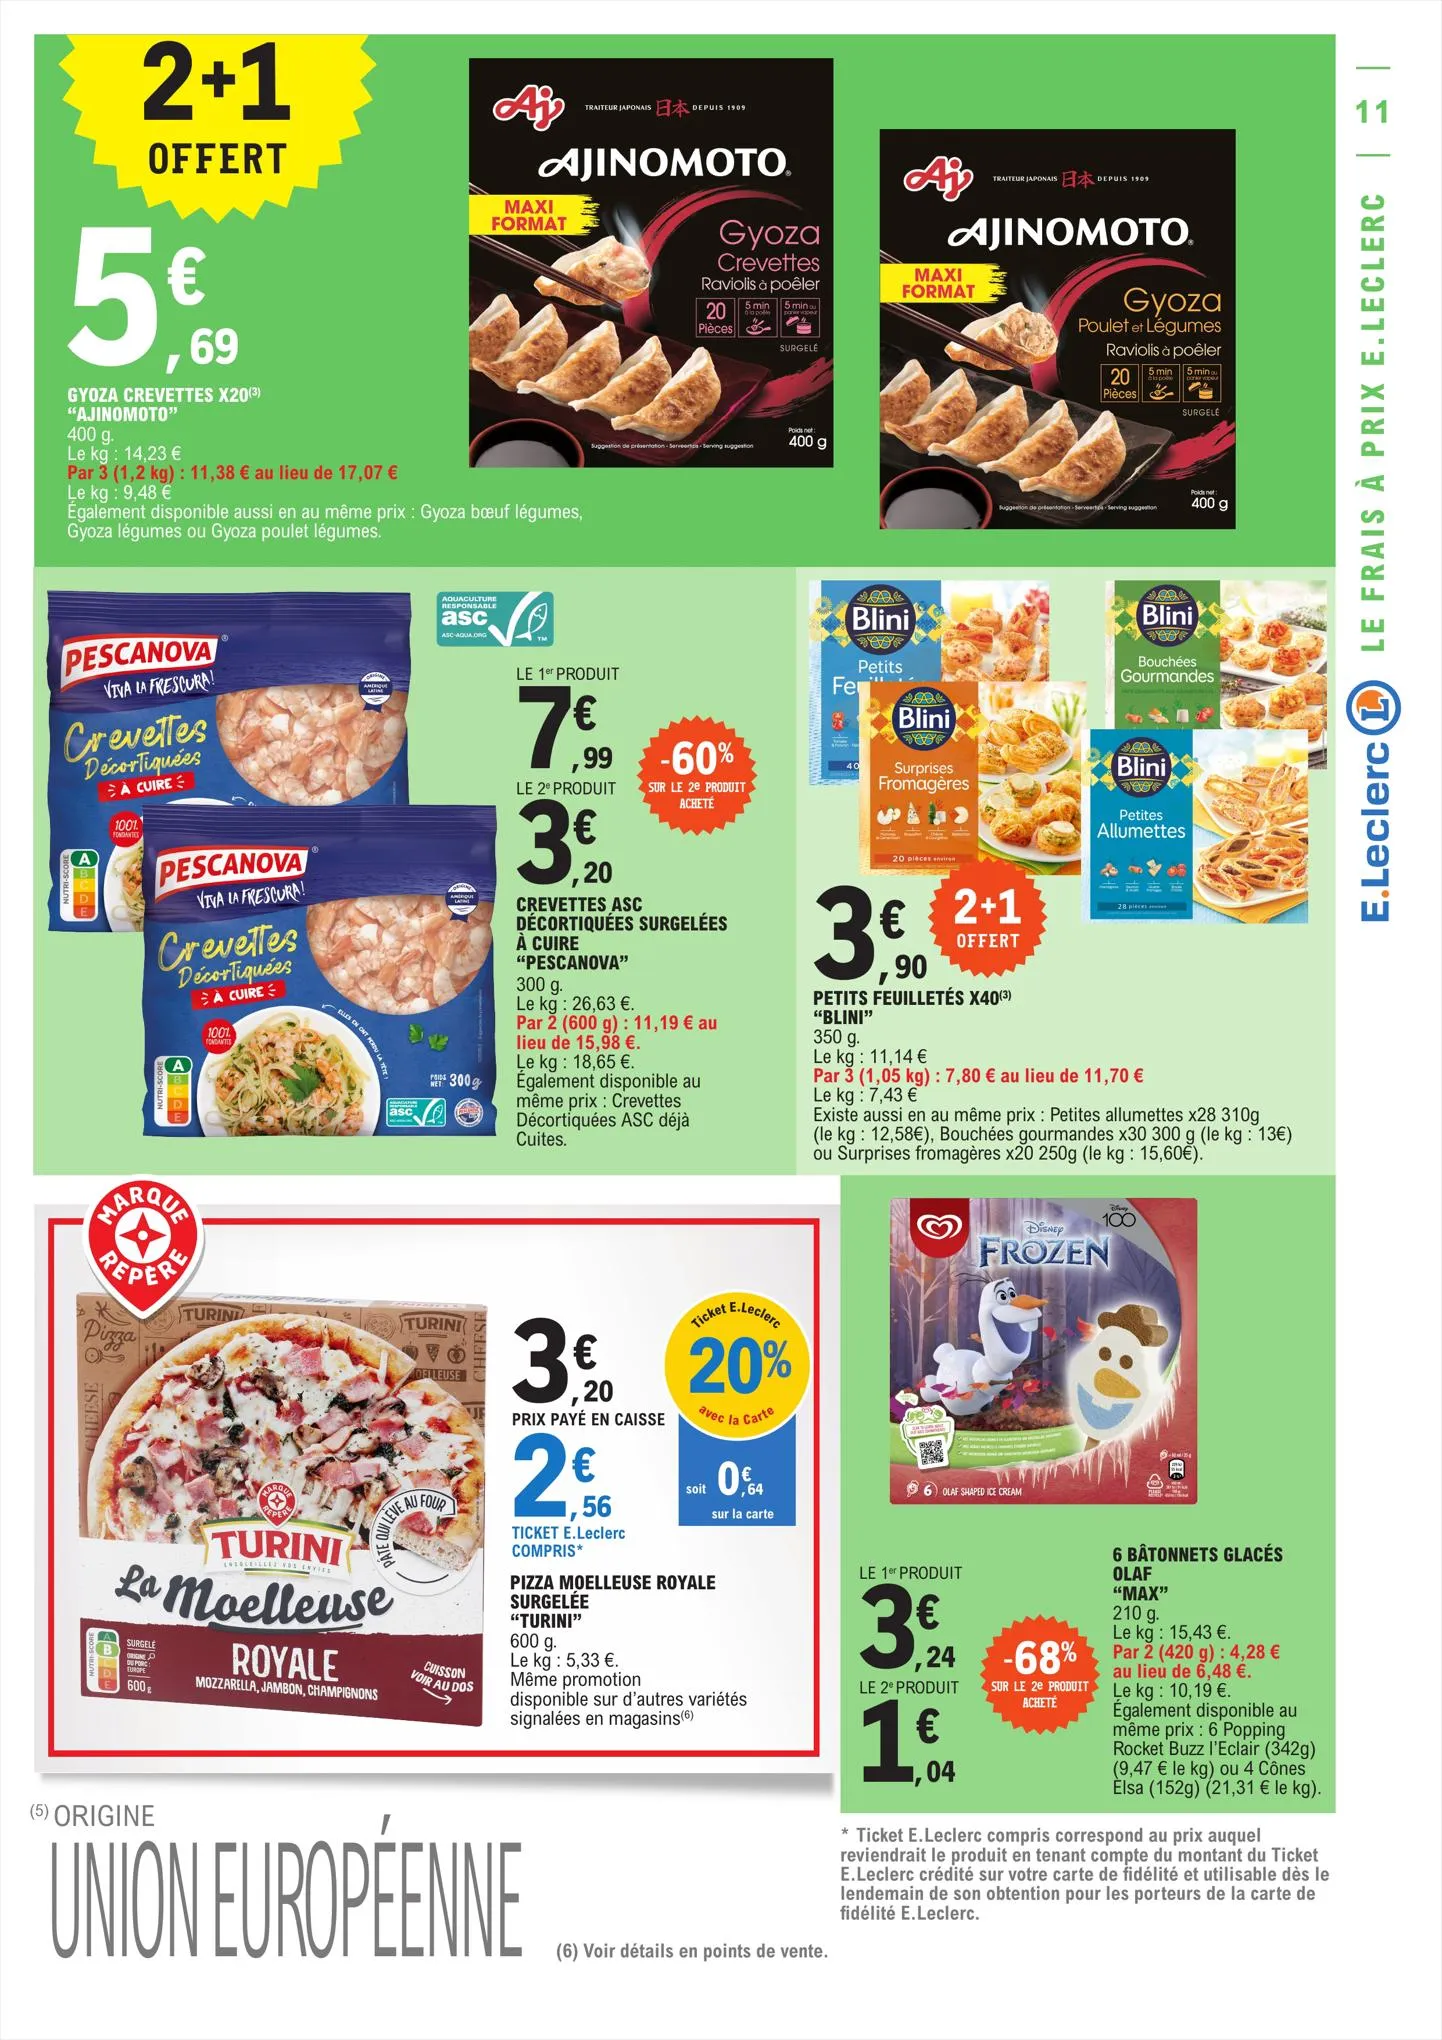 Catalogue Relance Alimentaire 10 - Mixte, page 00011